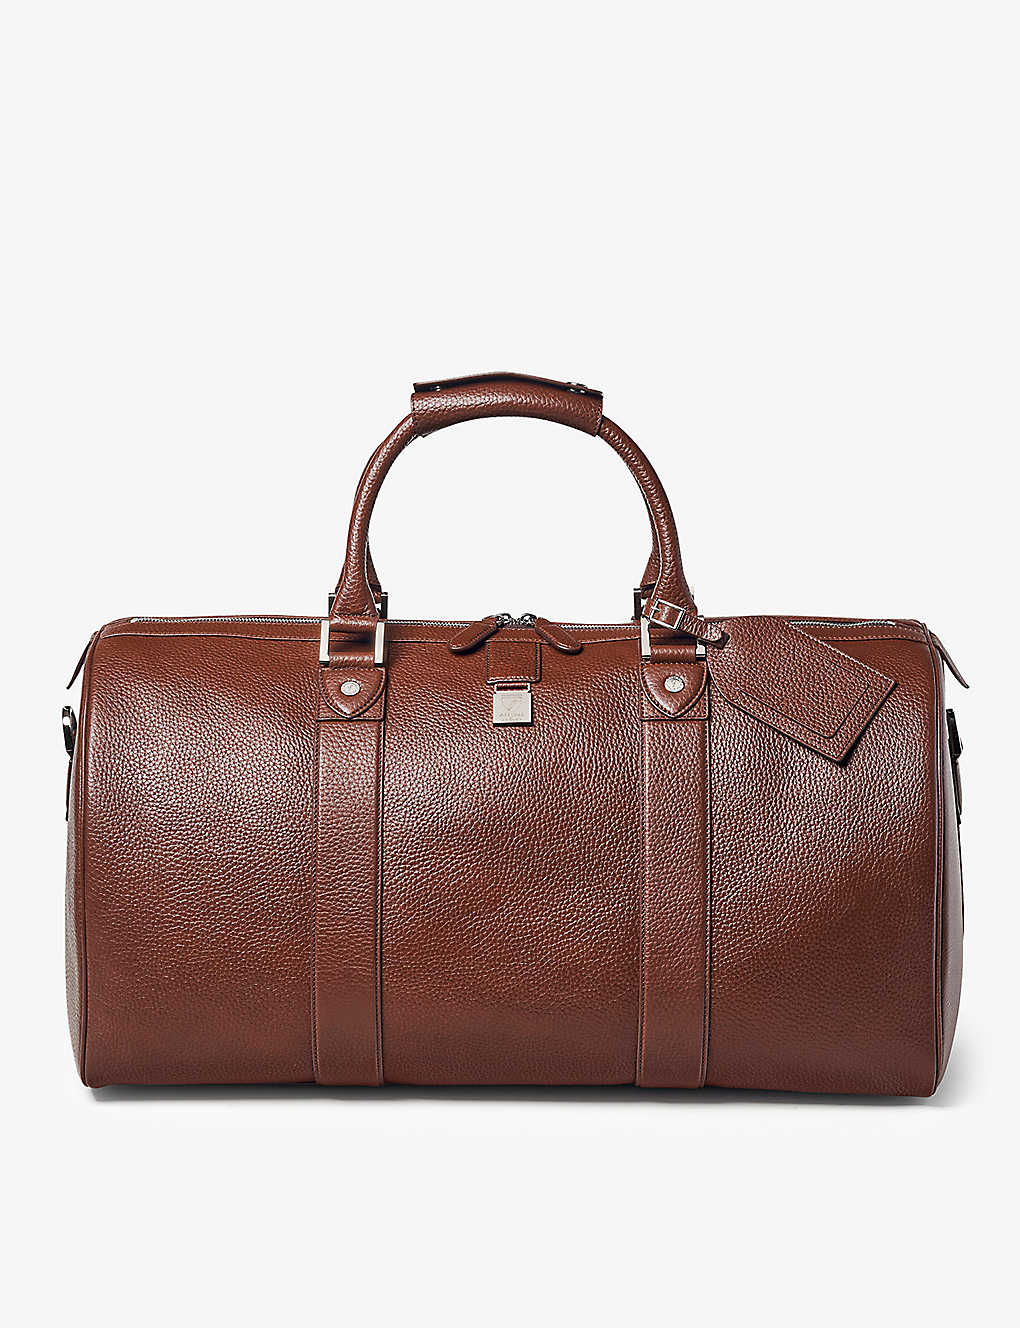 ASPINAL OF LONDON ASPINAL OF LONDON TOBACCO BOSTON GRAINED-LEATHER DUFFLE BAG,48224001